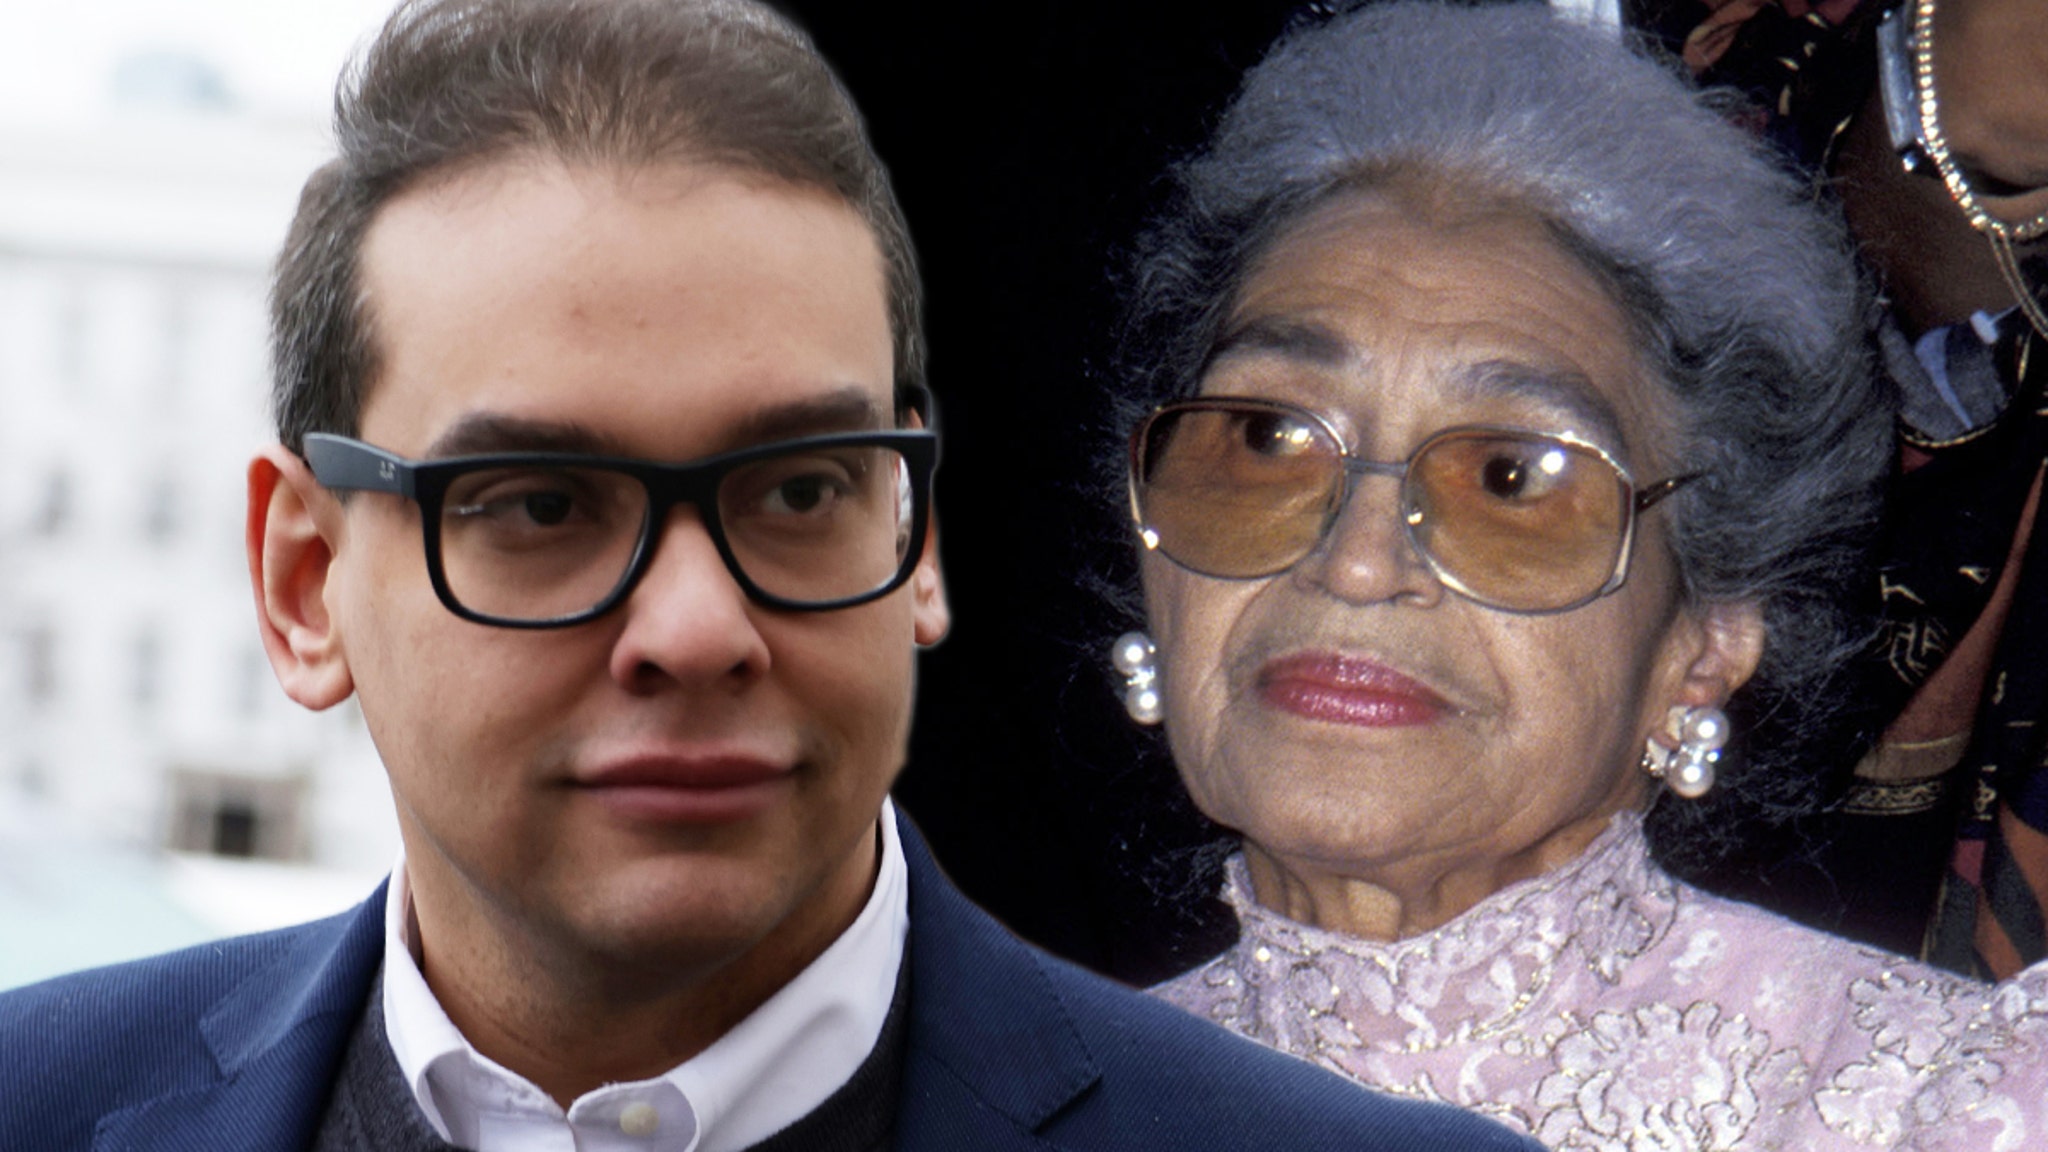 Rep. George Santos Slammed By Rosa Parks Niece After Making Comparison